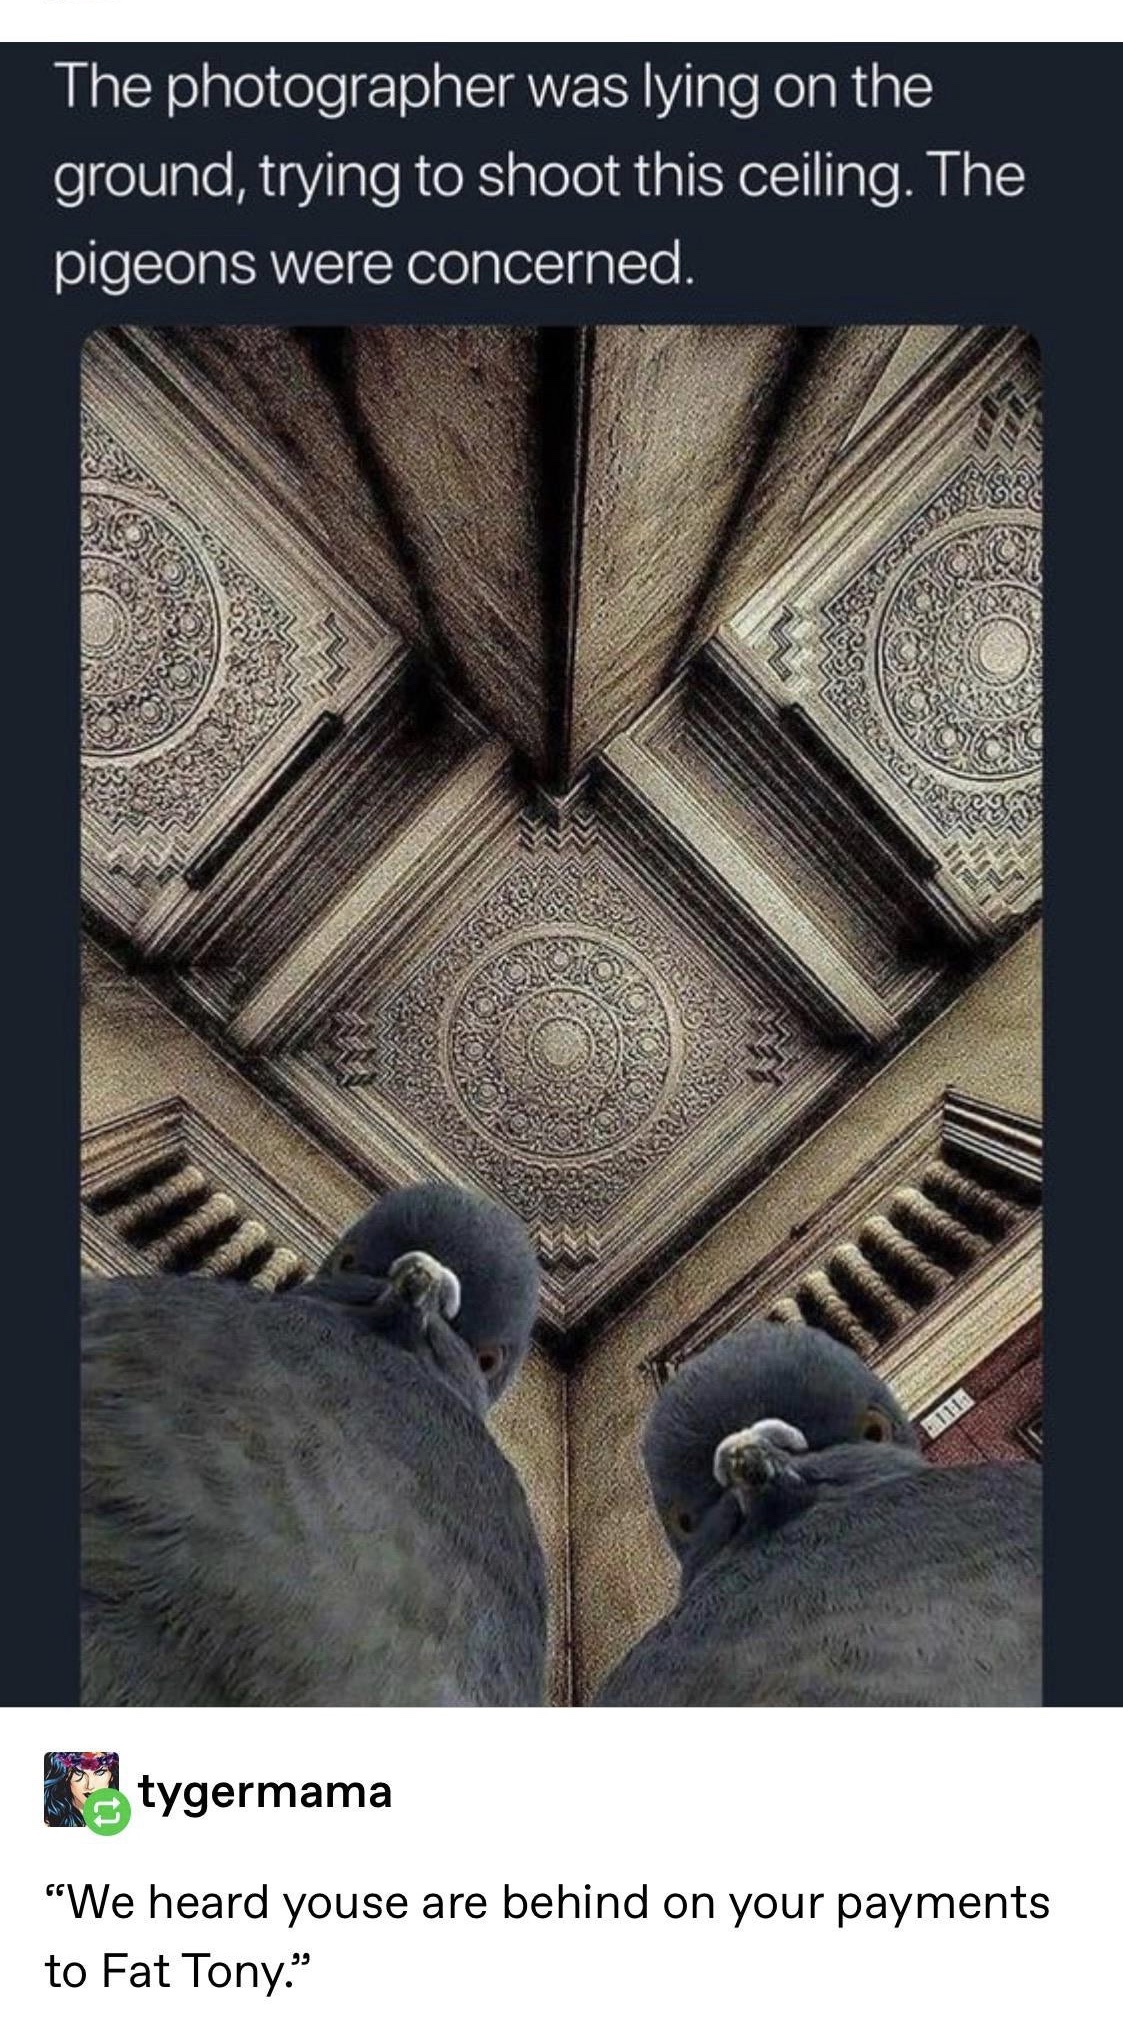 funny birds - The photographer was lying on the ground, trying to shoot this ceiling. The pigeons were concerned. tygermama "We heard youse are behind on your payments to Fat Tony."